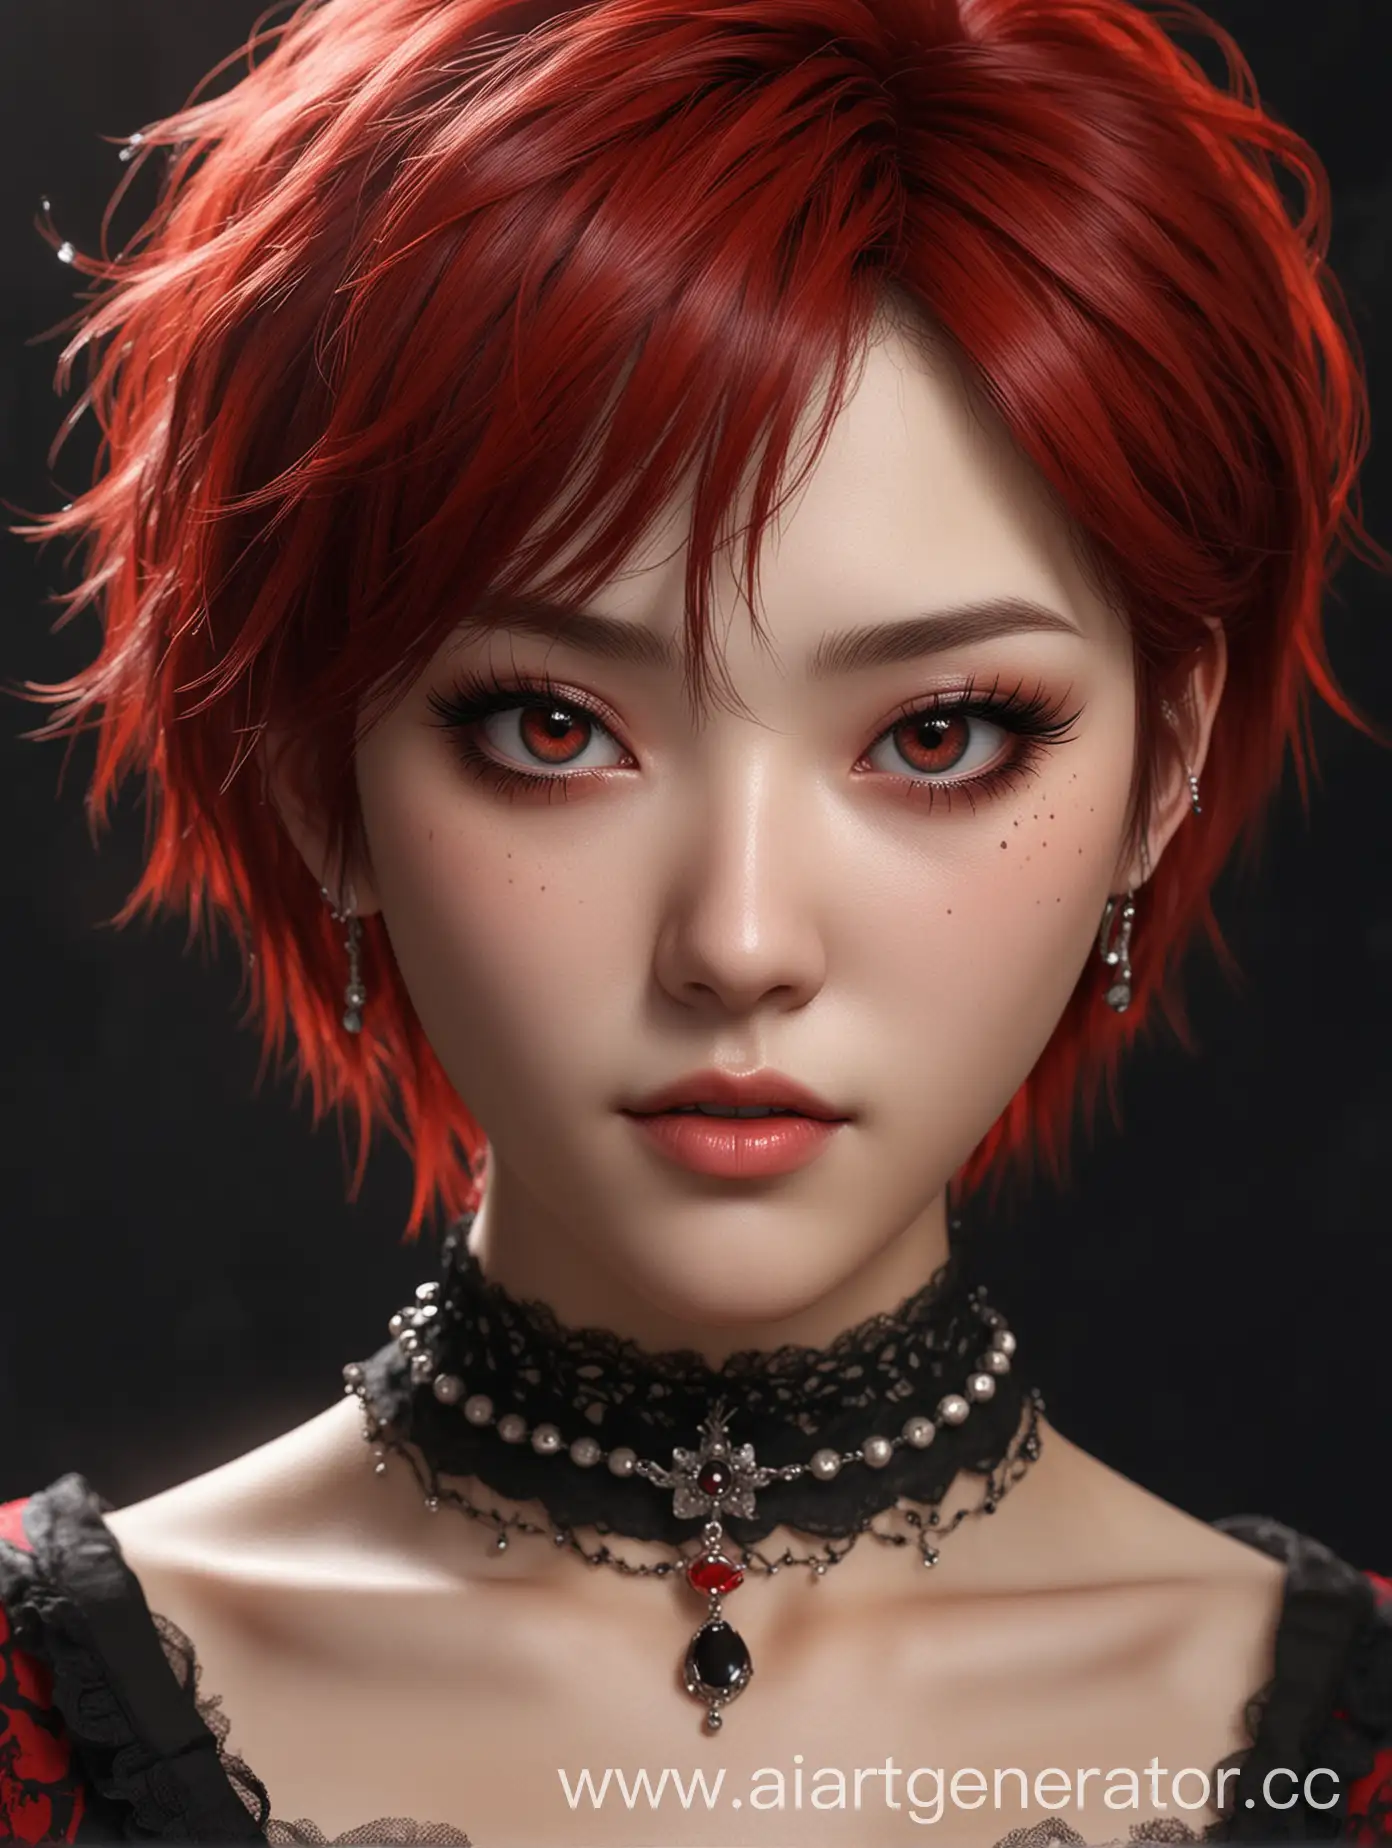 ​masterpiece, top-quality, ((1womanl)), different red color, finely eye and detailed face, intricate detailes, Casual black and red attire, window, A smile, Happiness, tenderness, high-level image quality、selfee, Beautuful Women、tall、a small face, D-cups, The upper part of the body、nightfall, nighttime scene、𝓡𝓸𝓶𝓪𝓷𝓽𝓲𝓬、Korea person, Idol Photos, Model photo, k pop, Professional Photos, Vampires, Korean fashion in black and red, Fedoman with necklace, inspired by Sim Sa-jeong, androgynous vampire, :9 detailed face: 8, extra detailed face, detailed punk hair, ((eyes are deialed)) baggy eyes, Seductive. Highly detailed, semi realistic anime, Vampires, hyperrealistic teen, Delicate androgynous princess, imvu, ((short hair woman)), red hair woman with wild look, ((Woman with short red hair)), ((1 persons)),